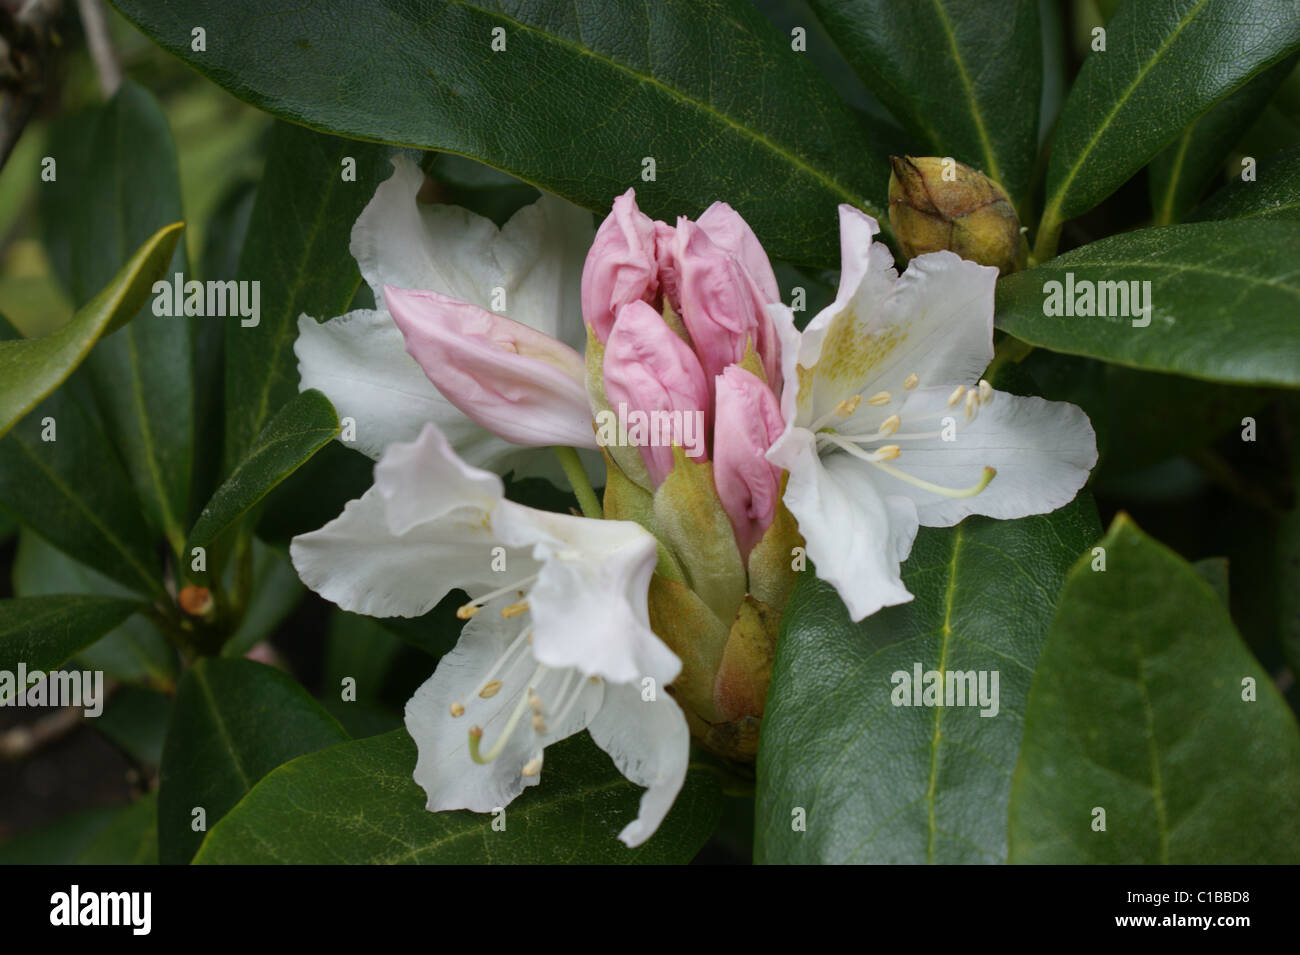 Rhododendron 'Cunningham's White' Stock Photo